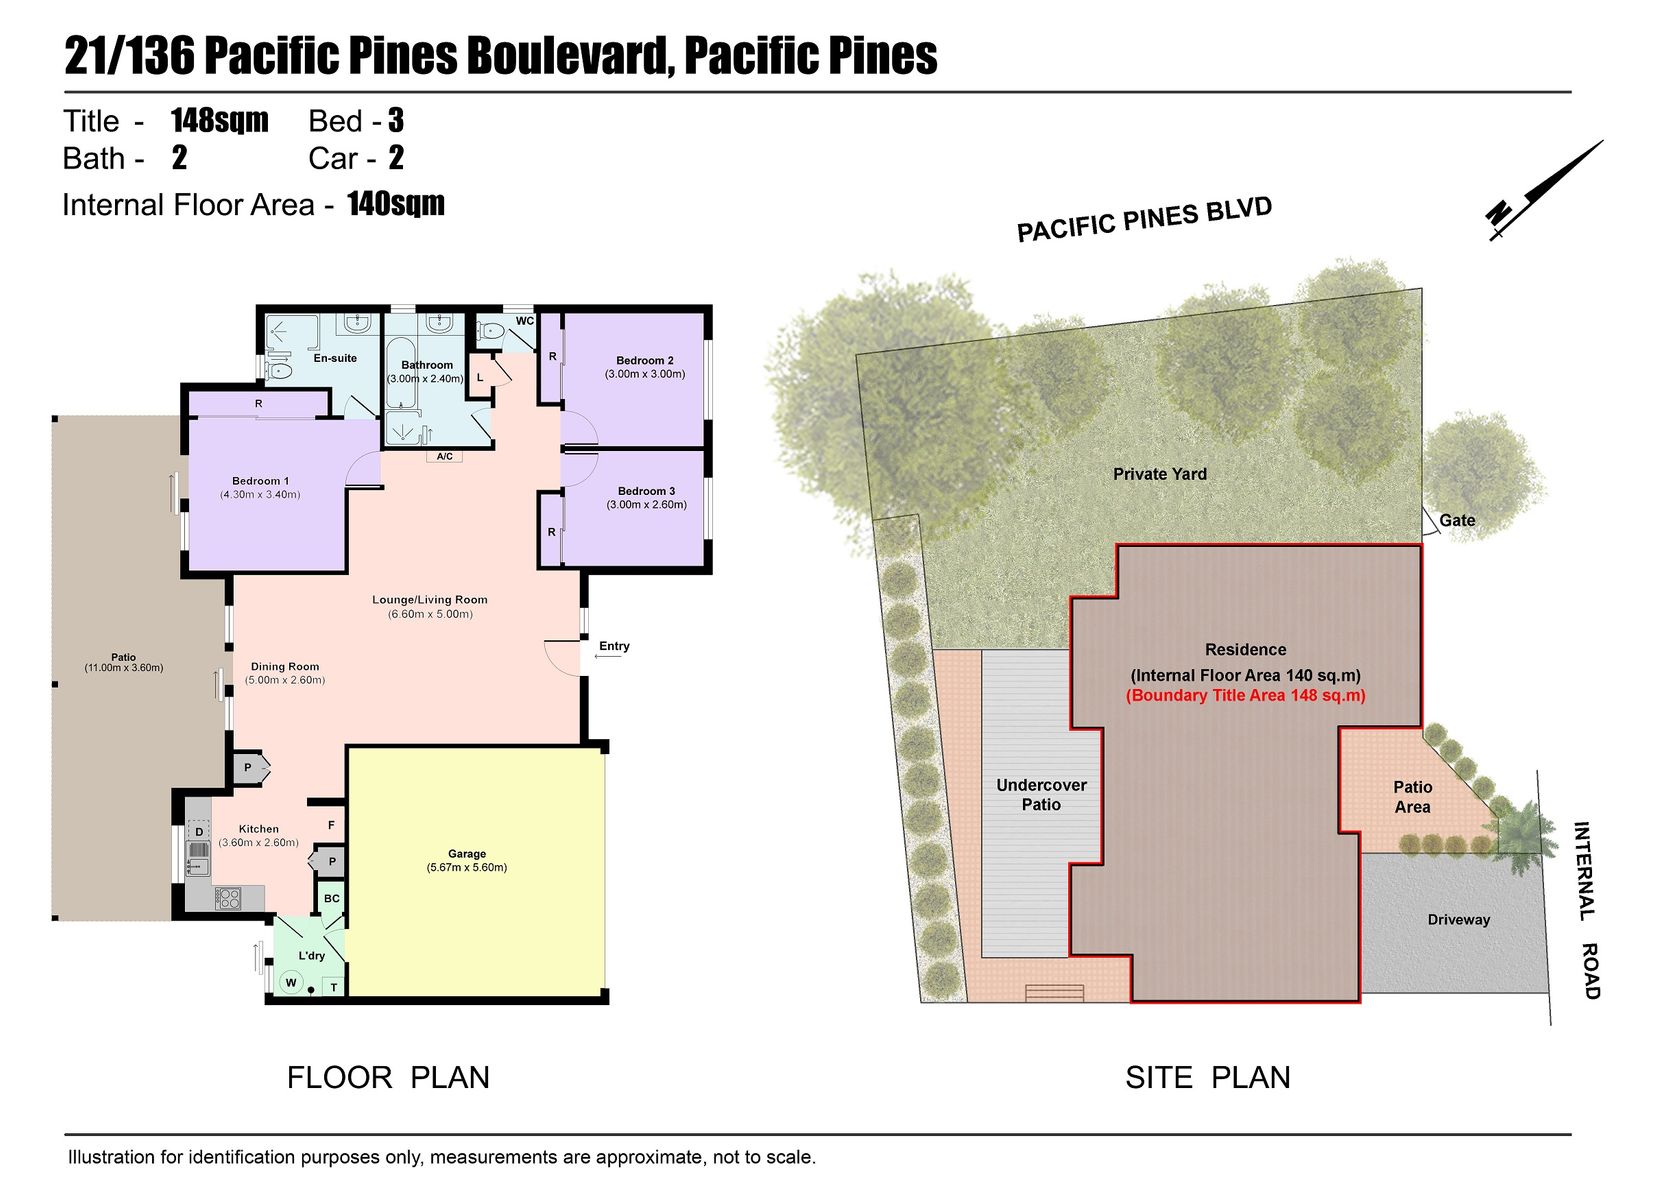 SitePlan 21 136 Pacific Pines Bouelvard Alessia Tang Reduced